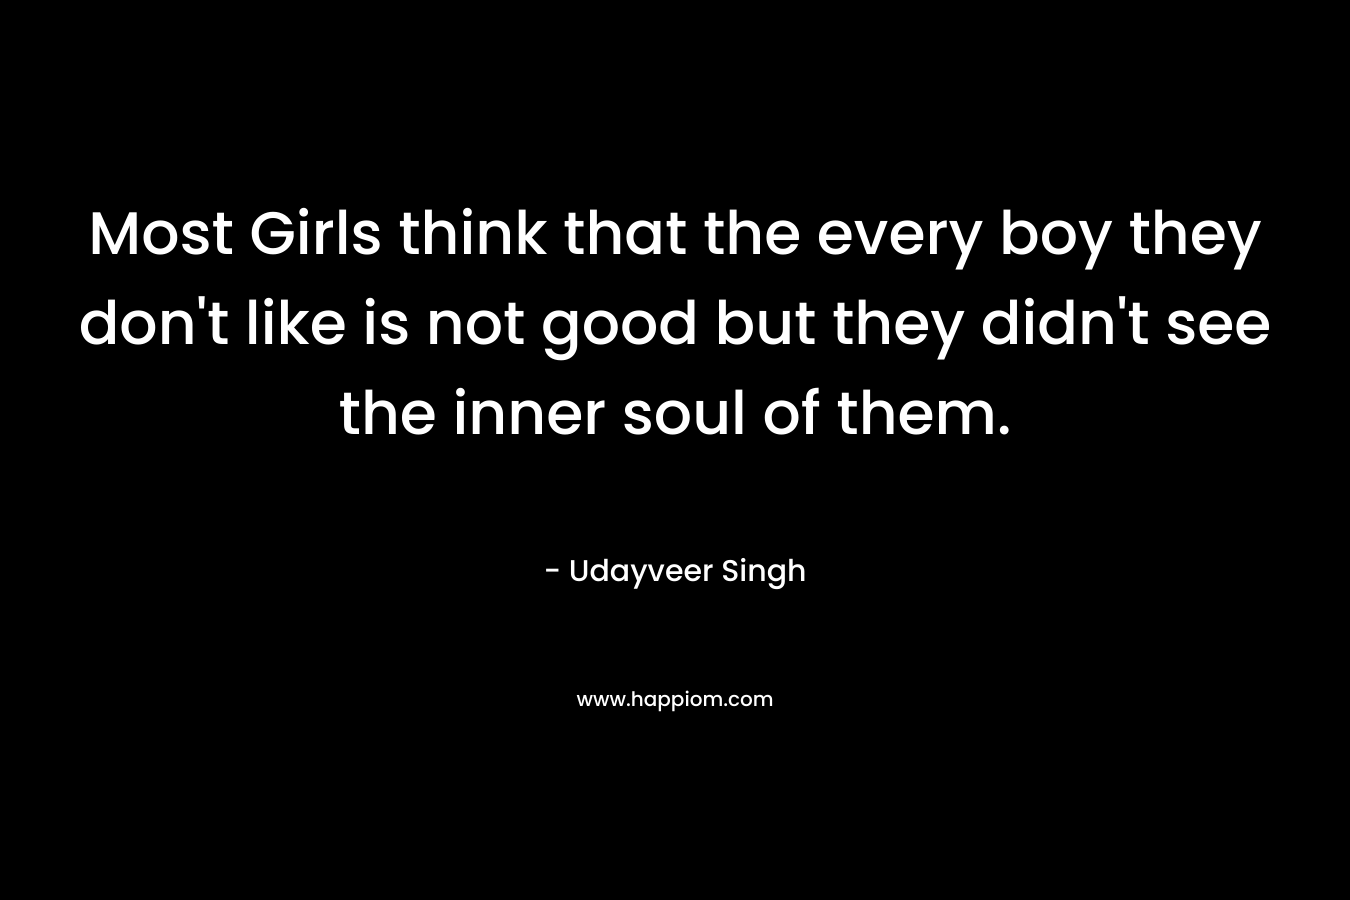 Most Girls think that the every boy they don’t like is not good but they didn’t see the inner soul of them. – Udayveer Singh